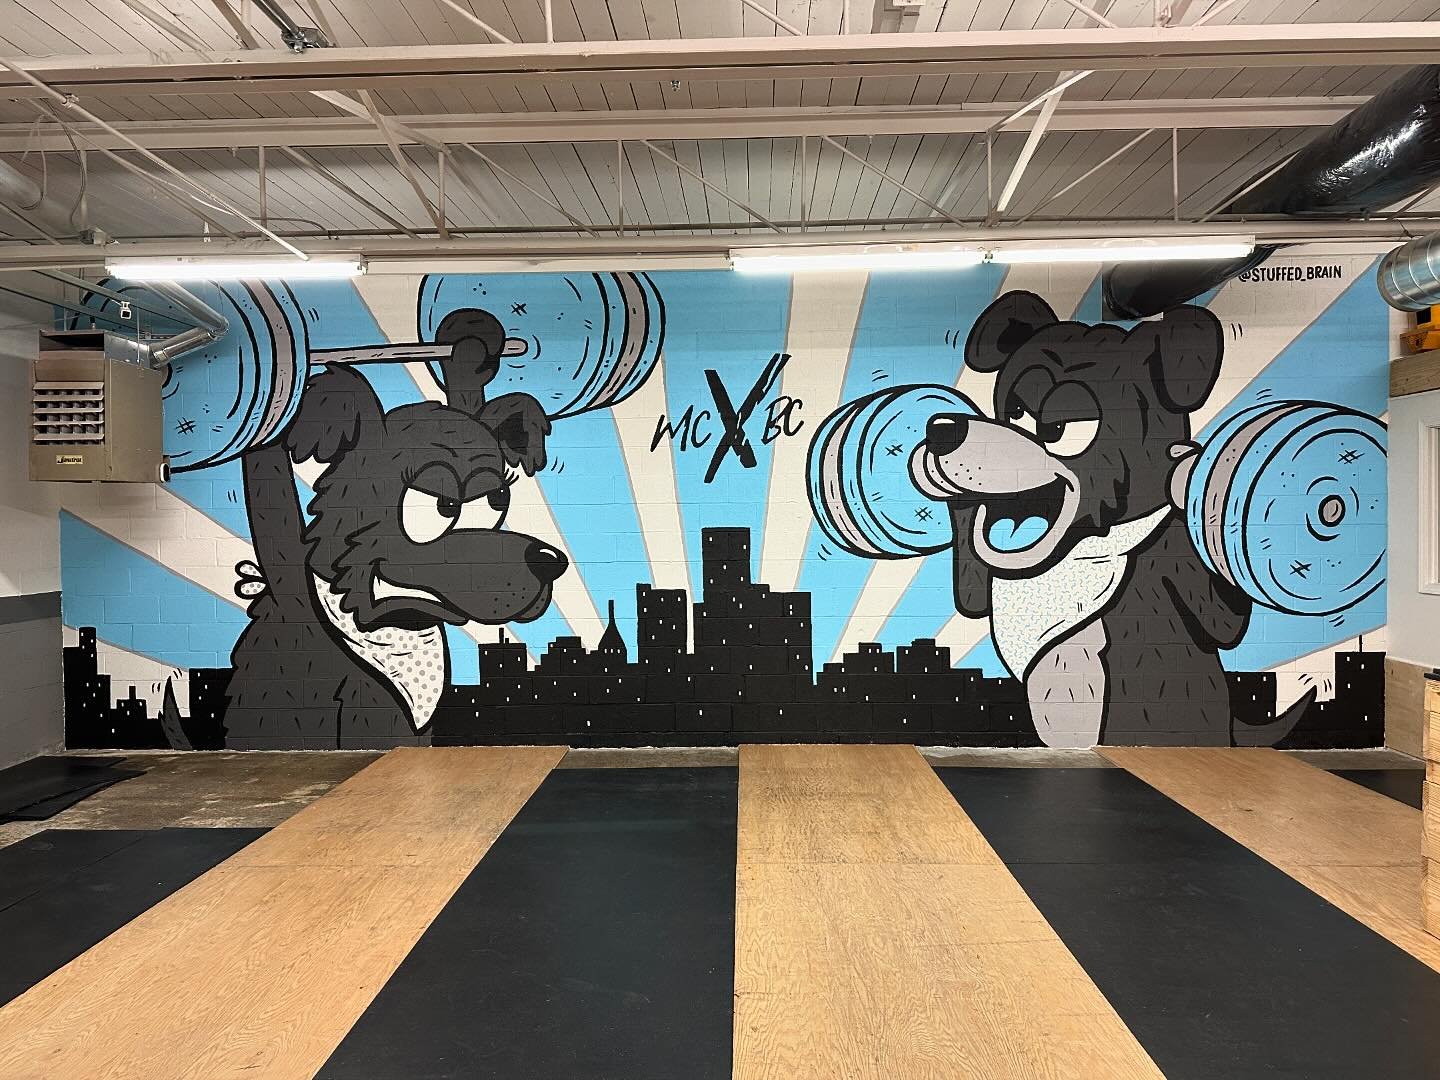 WHAT A WEEKEND! Earlier this year I made plans to attend Art Birmingham, selling my prints to the people, as I do. But, as my mural concept for @motorcitybarbellclub neared completion, I realized we had a unique opportunity to tackle both the mural a